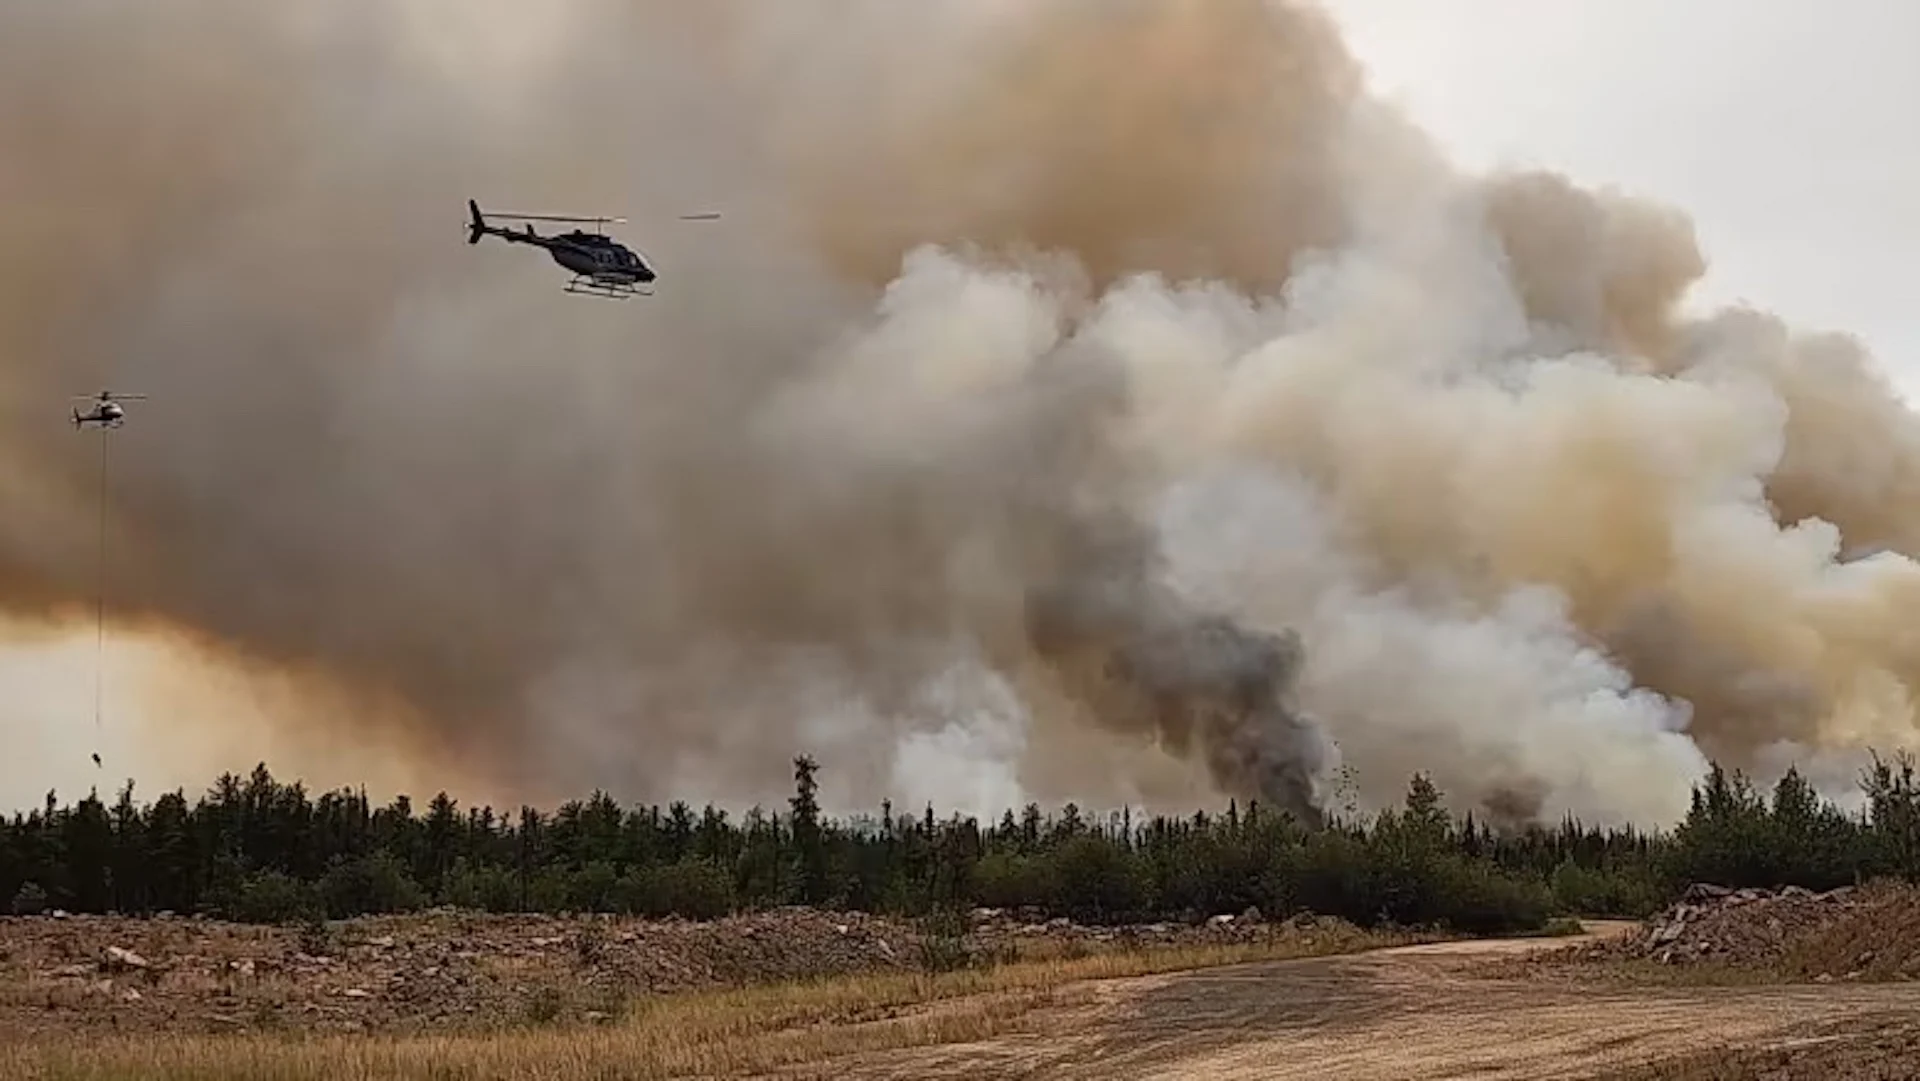 N.W.T., Yellowknife upping protection as city is surrounded by wildfires